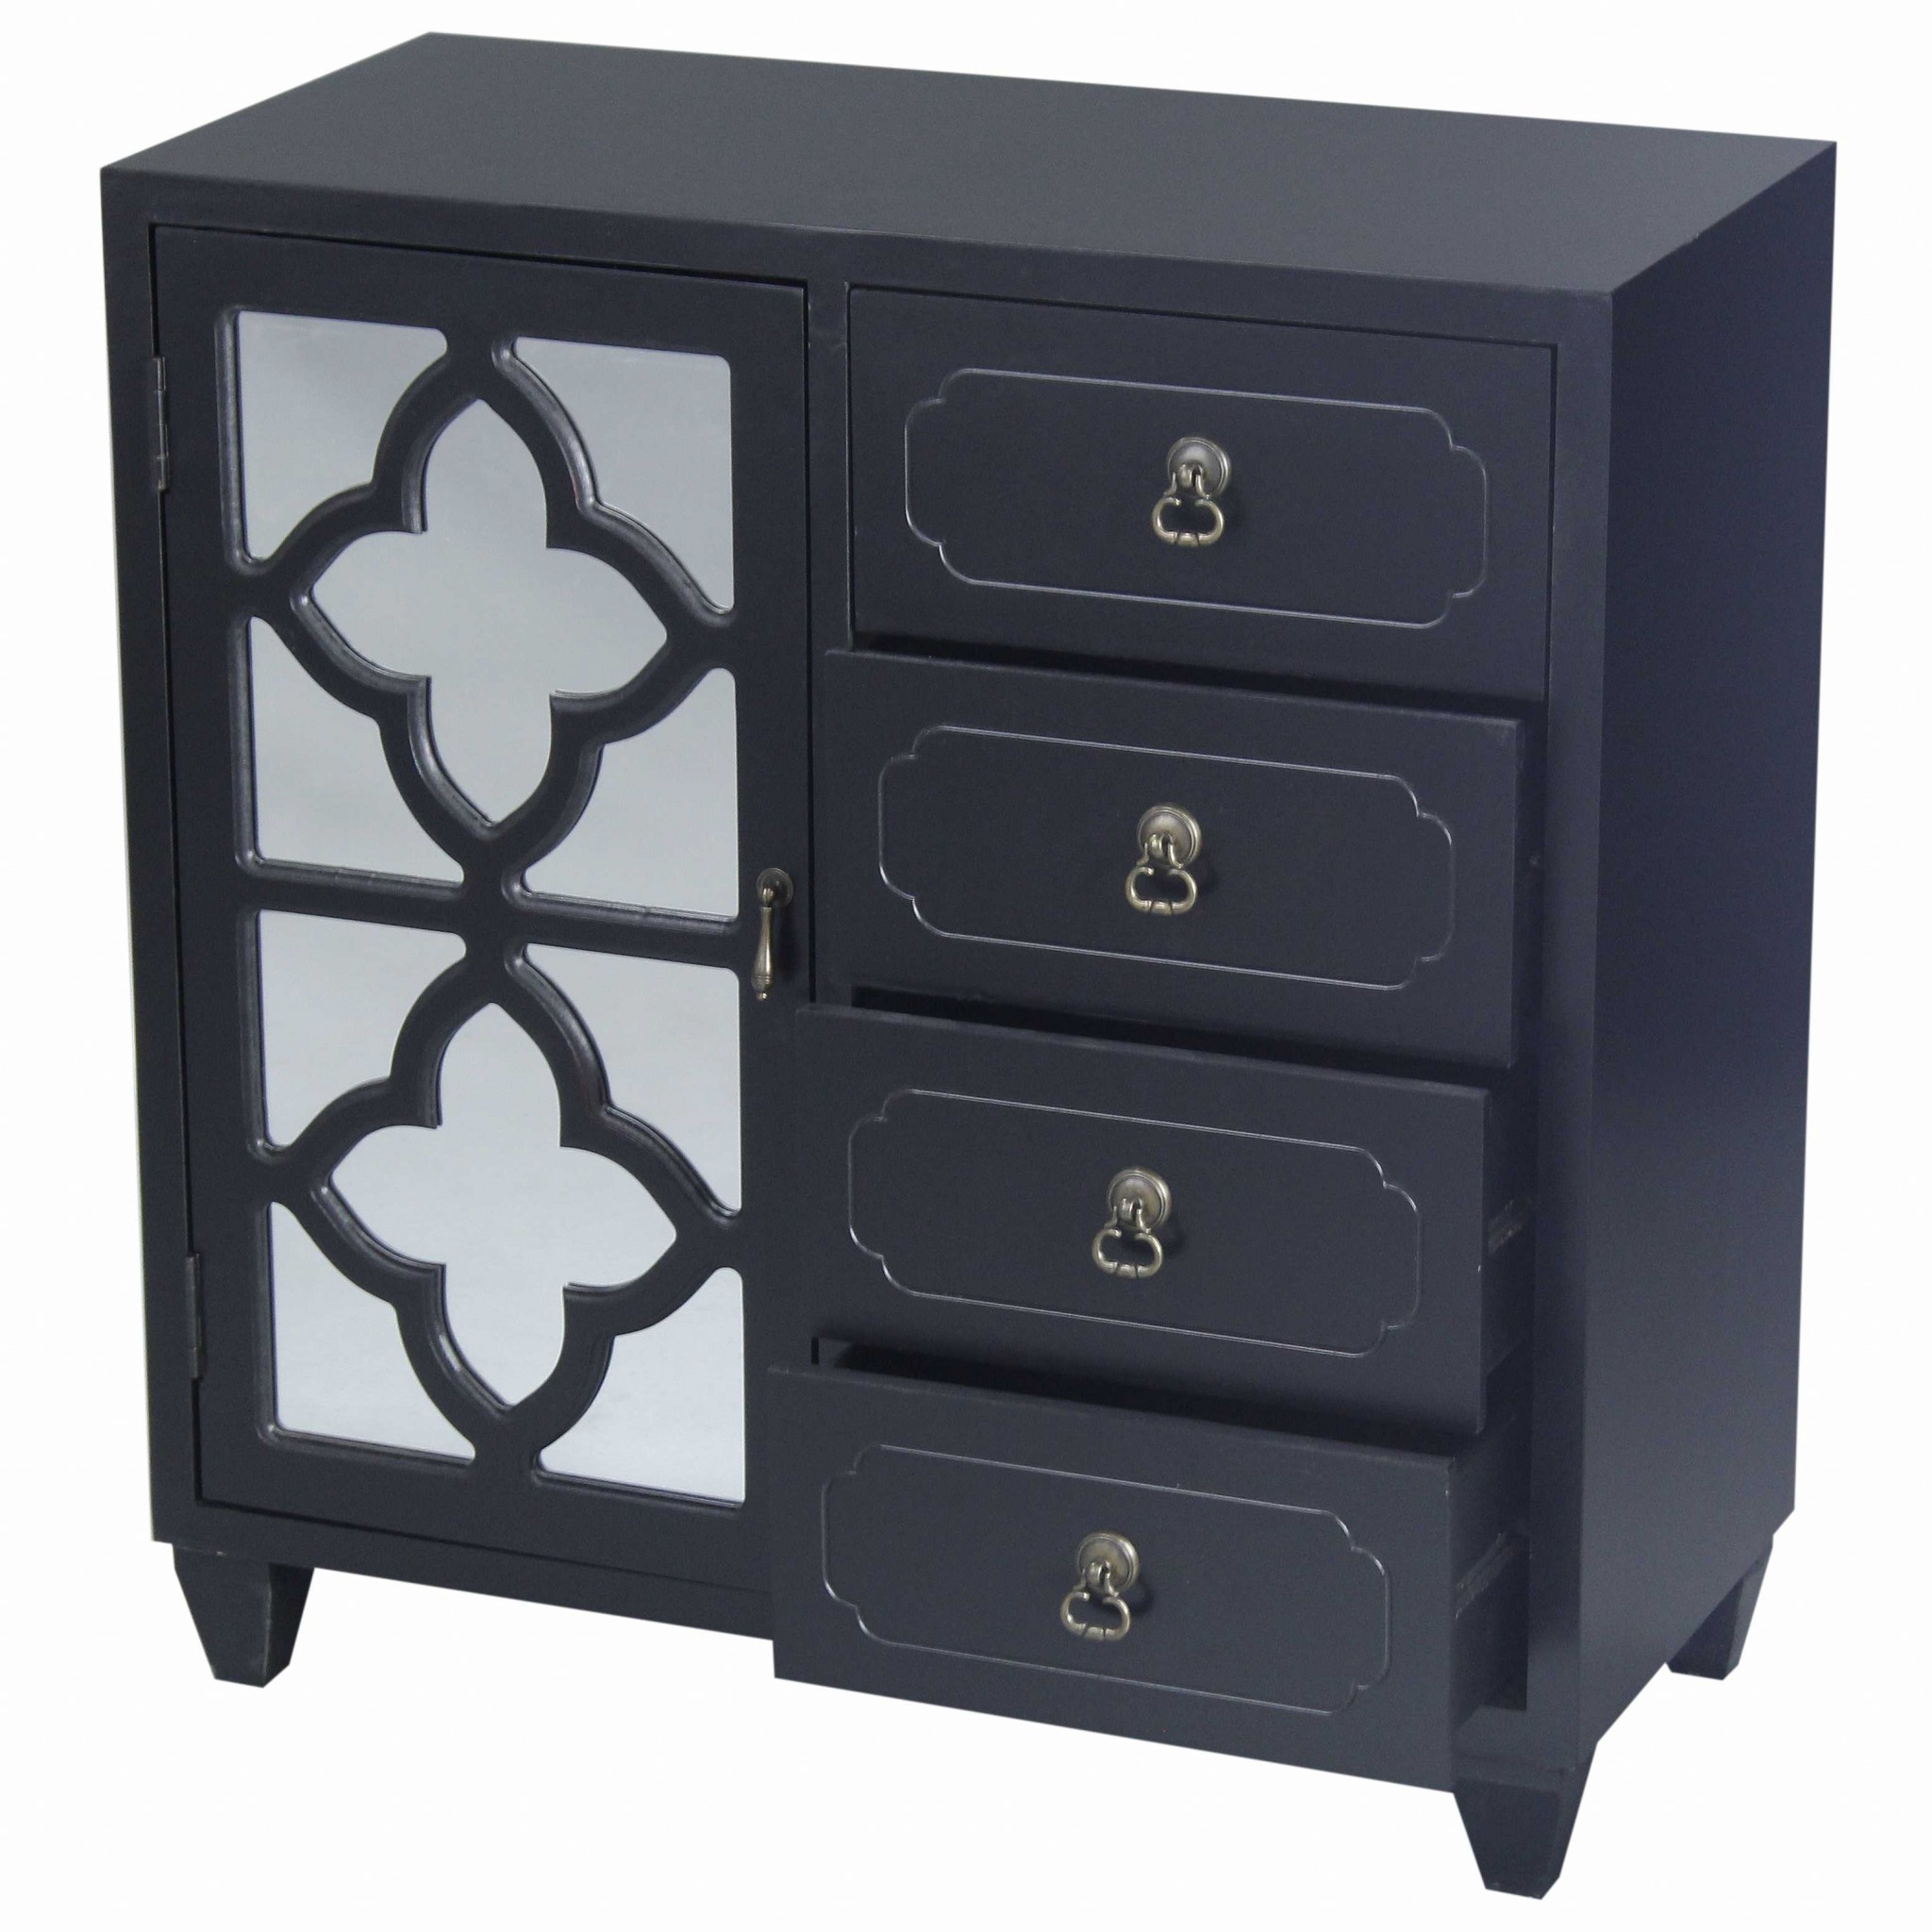 29.5" X 14" X 30.75" Black MDF Wood Mirrored Glass Sideboard with a Door Drawers and Quatrefoil Inserts